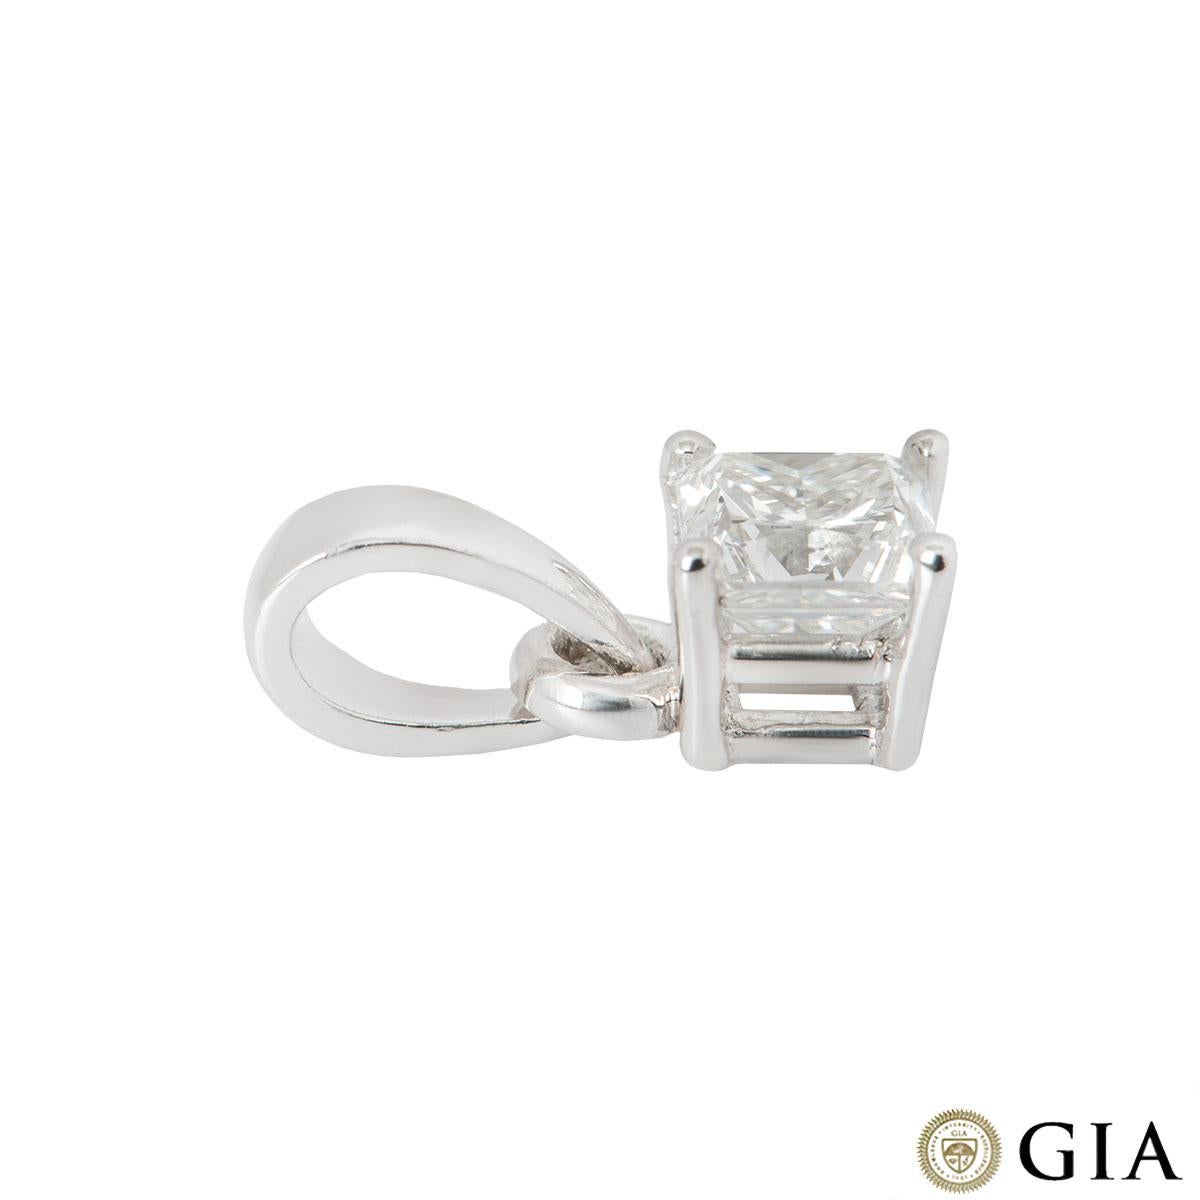 GIA Certified White Gold Princess Cut Diamond Pendant 0.90 I/VS1 In New Condition For Sale In London, GB